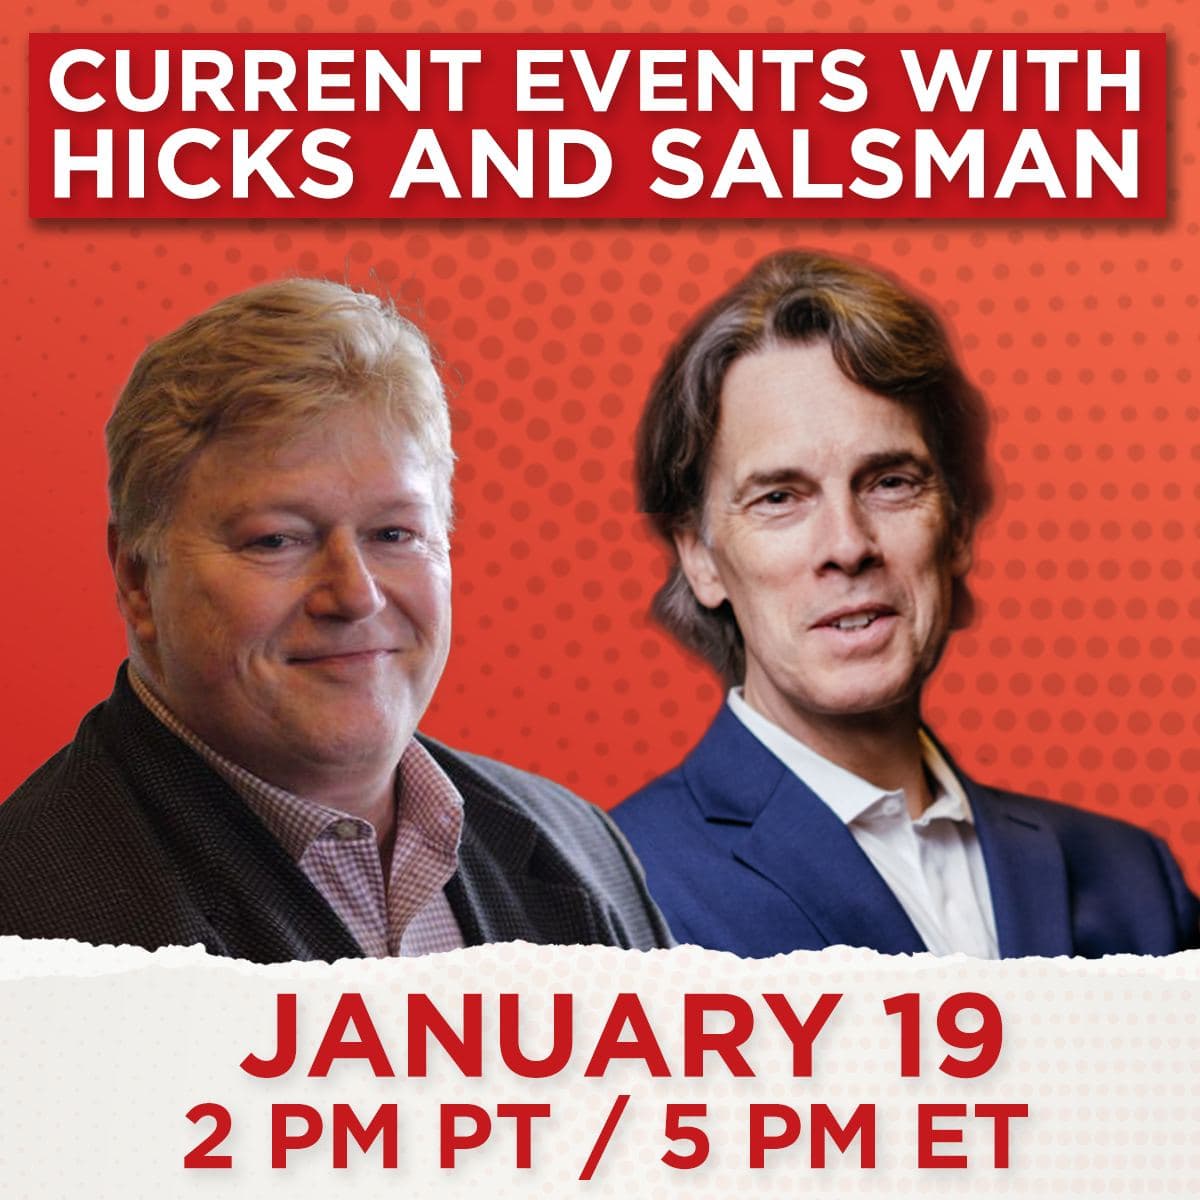 NYT Study on Hate Speech, +7% Inflation, and More - Current Events with Hicks and Salsman